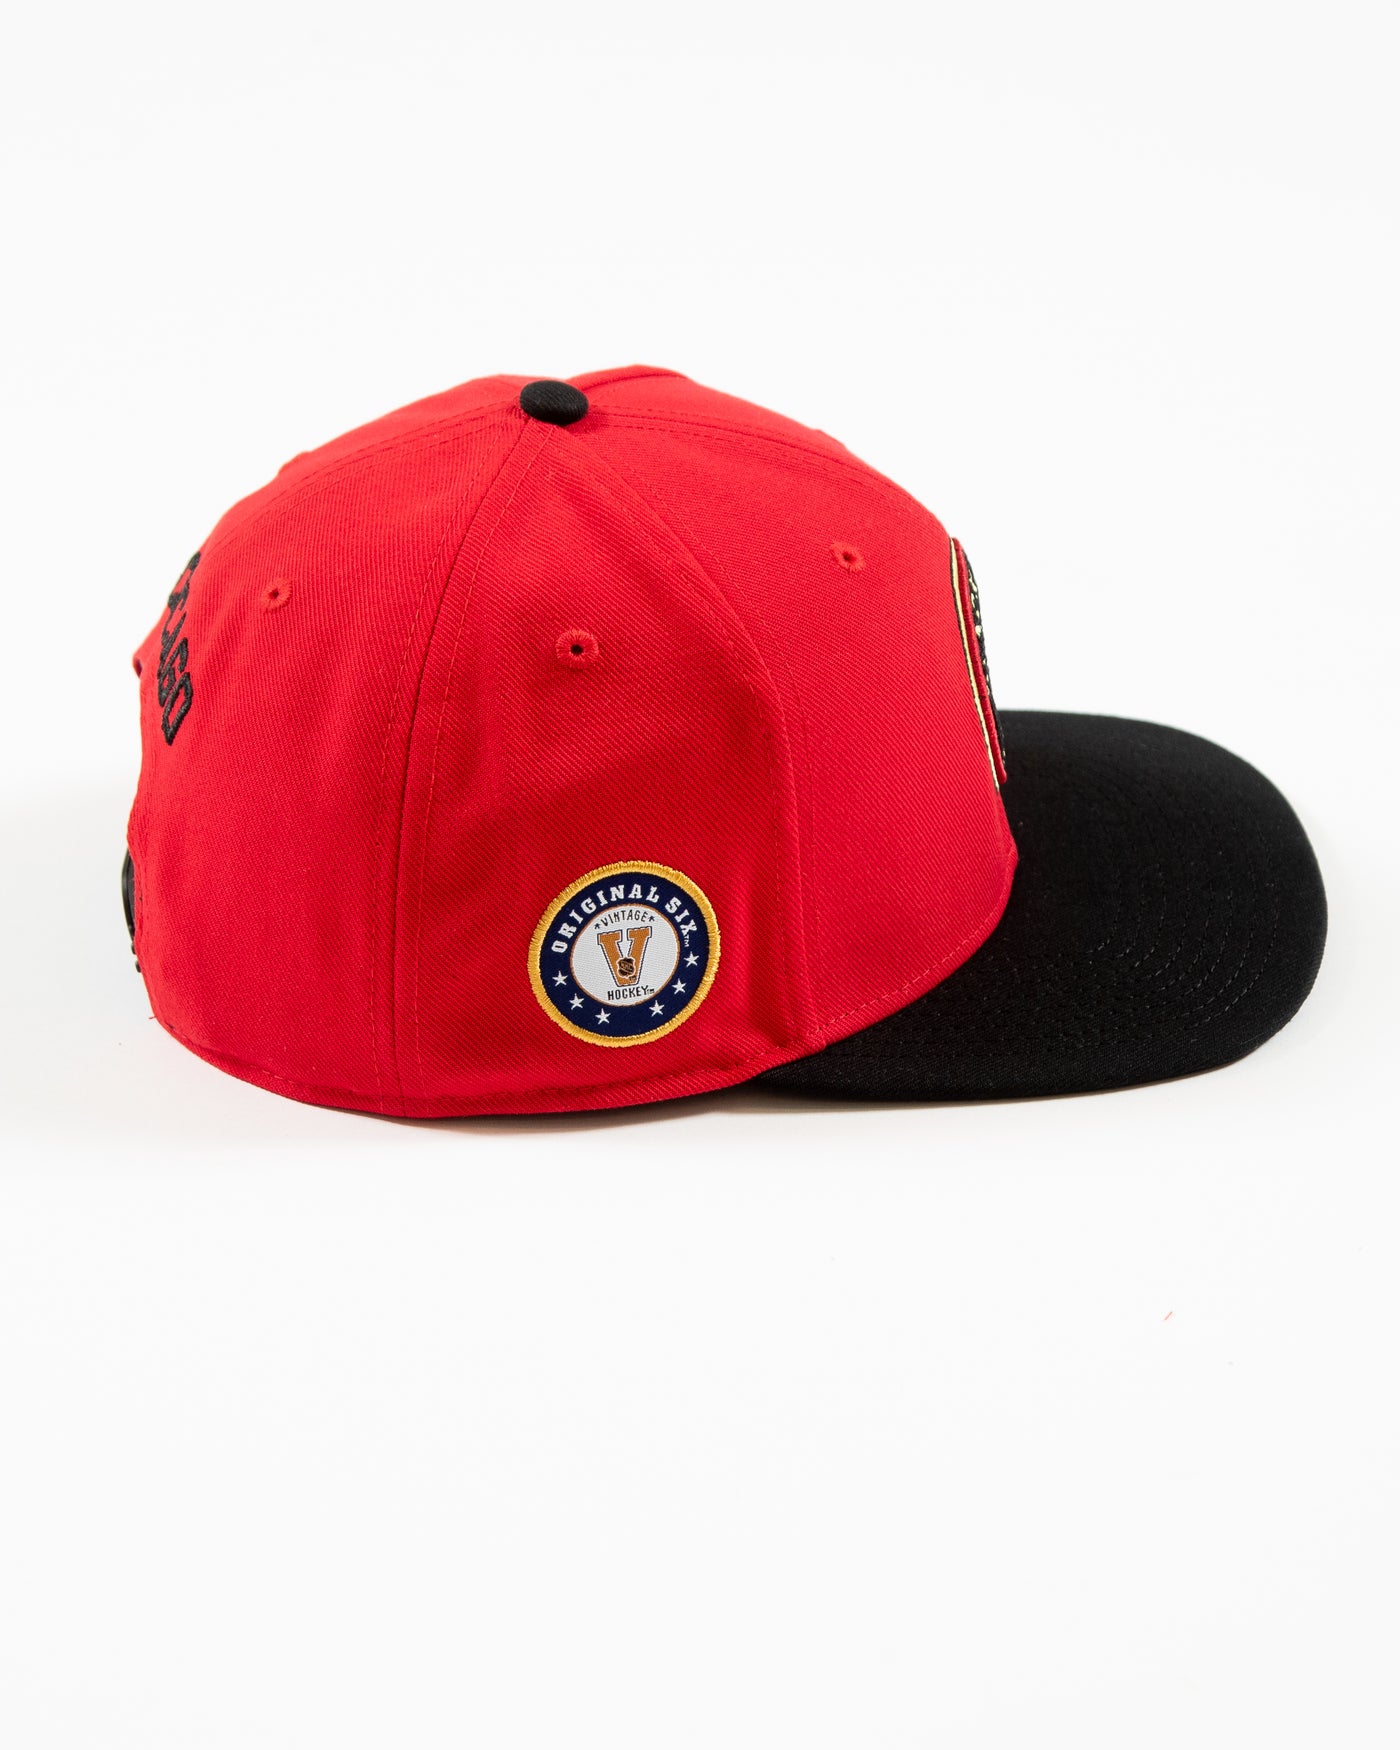 Red and black Fanatics snapback with vintage Chicago Blackhawks logo embroidered on front and original six patch embroidered on right side - right angle lay flat